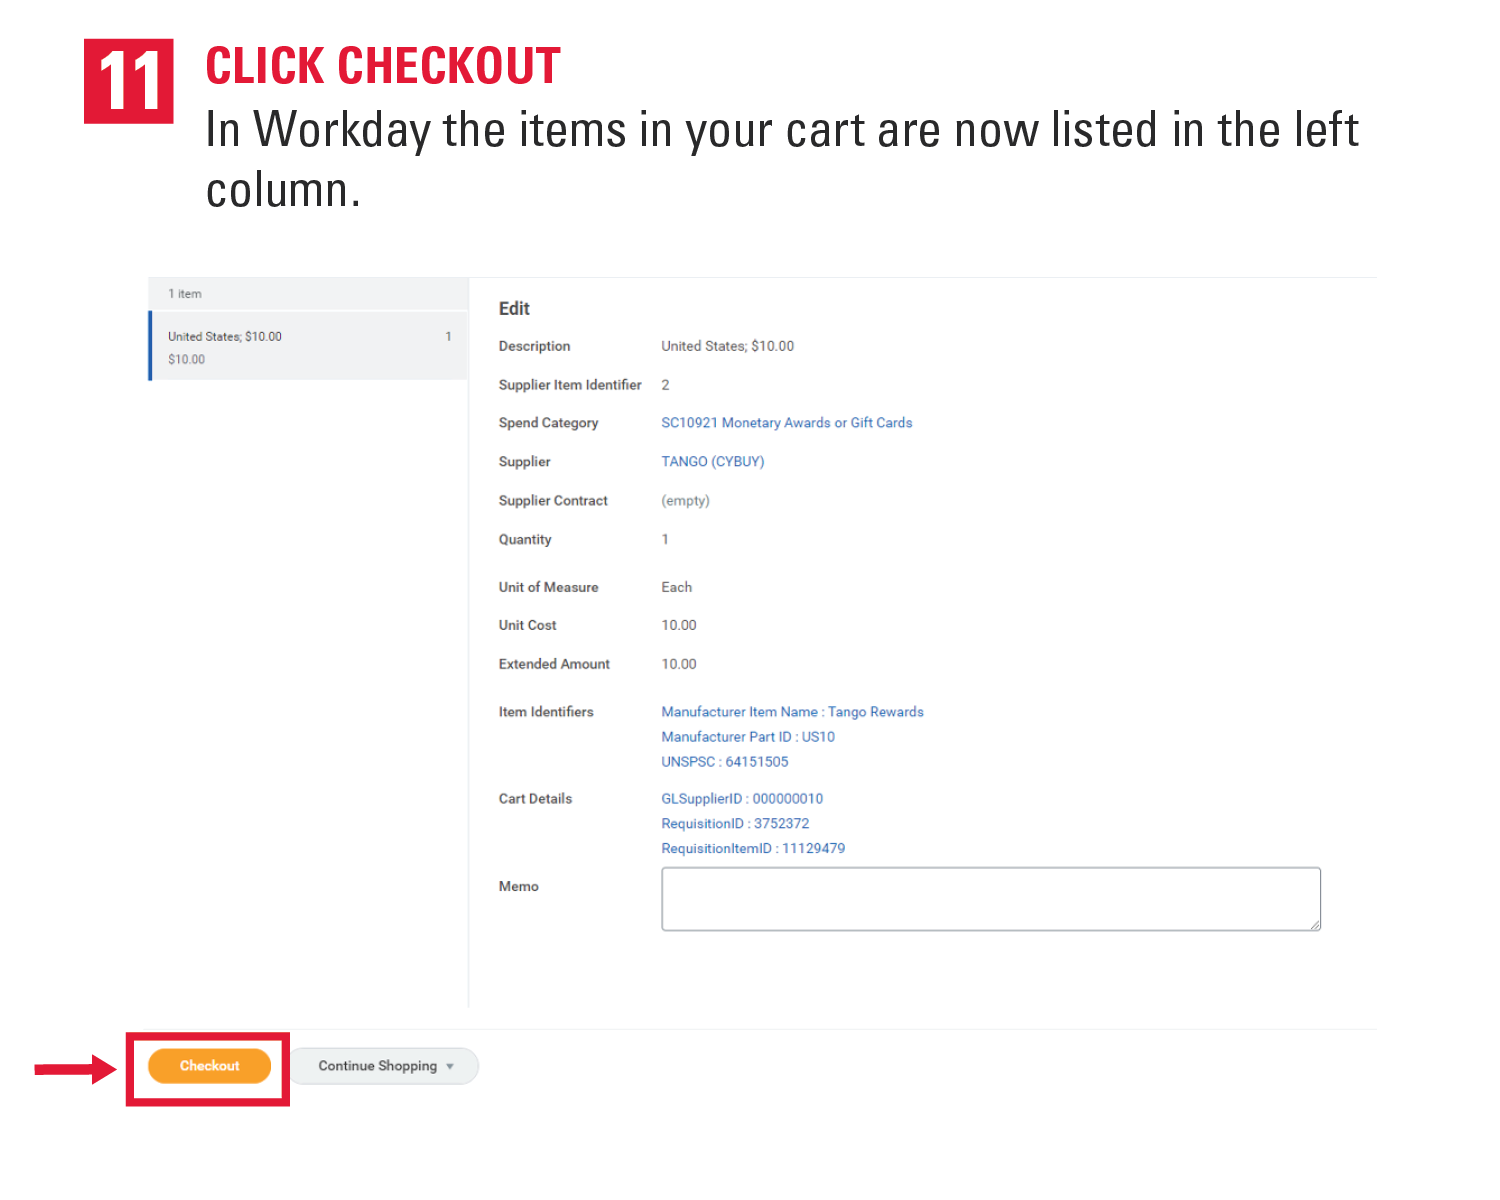 7h. If you aren’t automatically directed to this View Cart page. click the cart icon in the upper right as shown below.